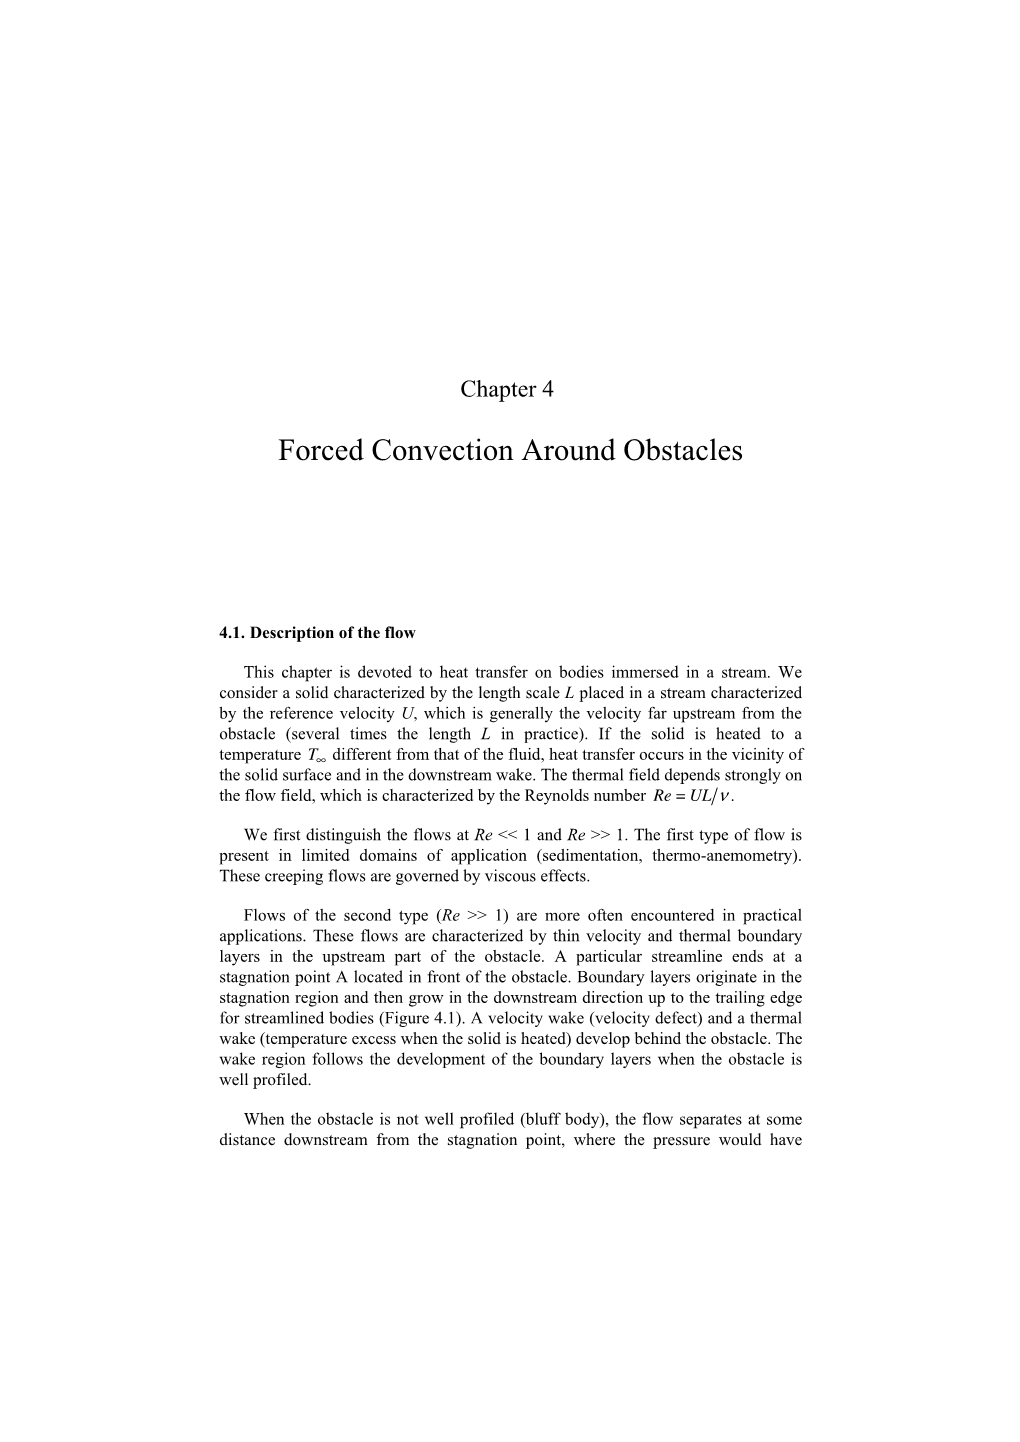 Forced Convection Around Obstacles